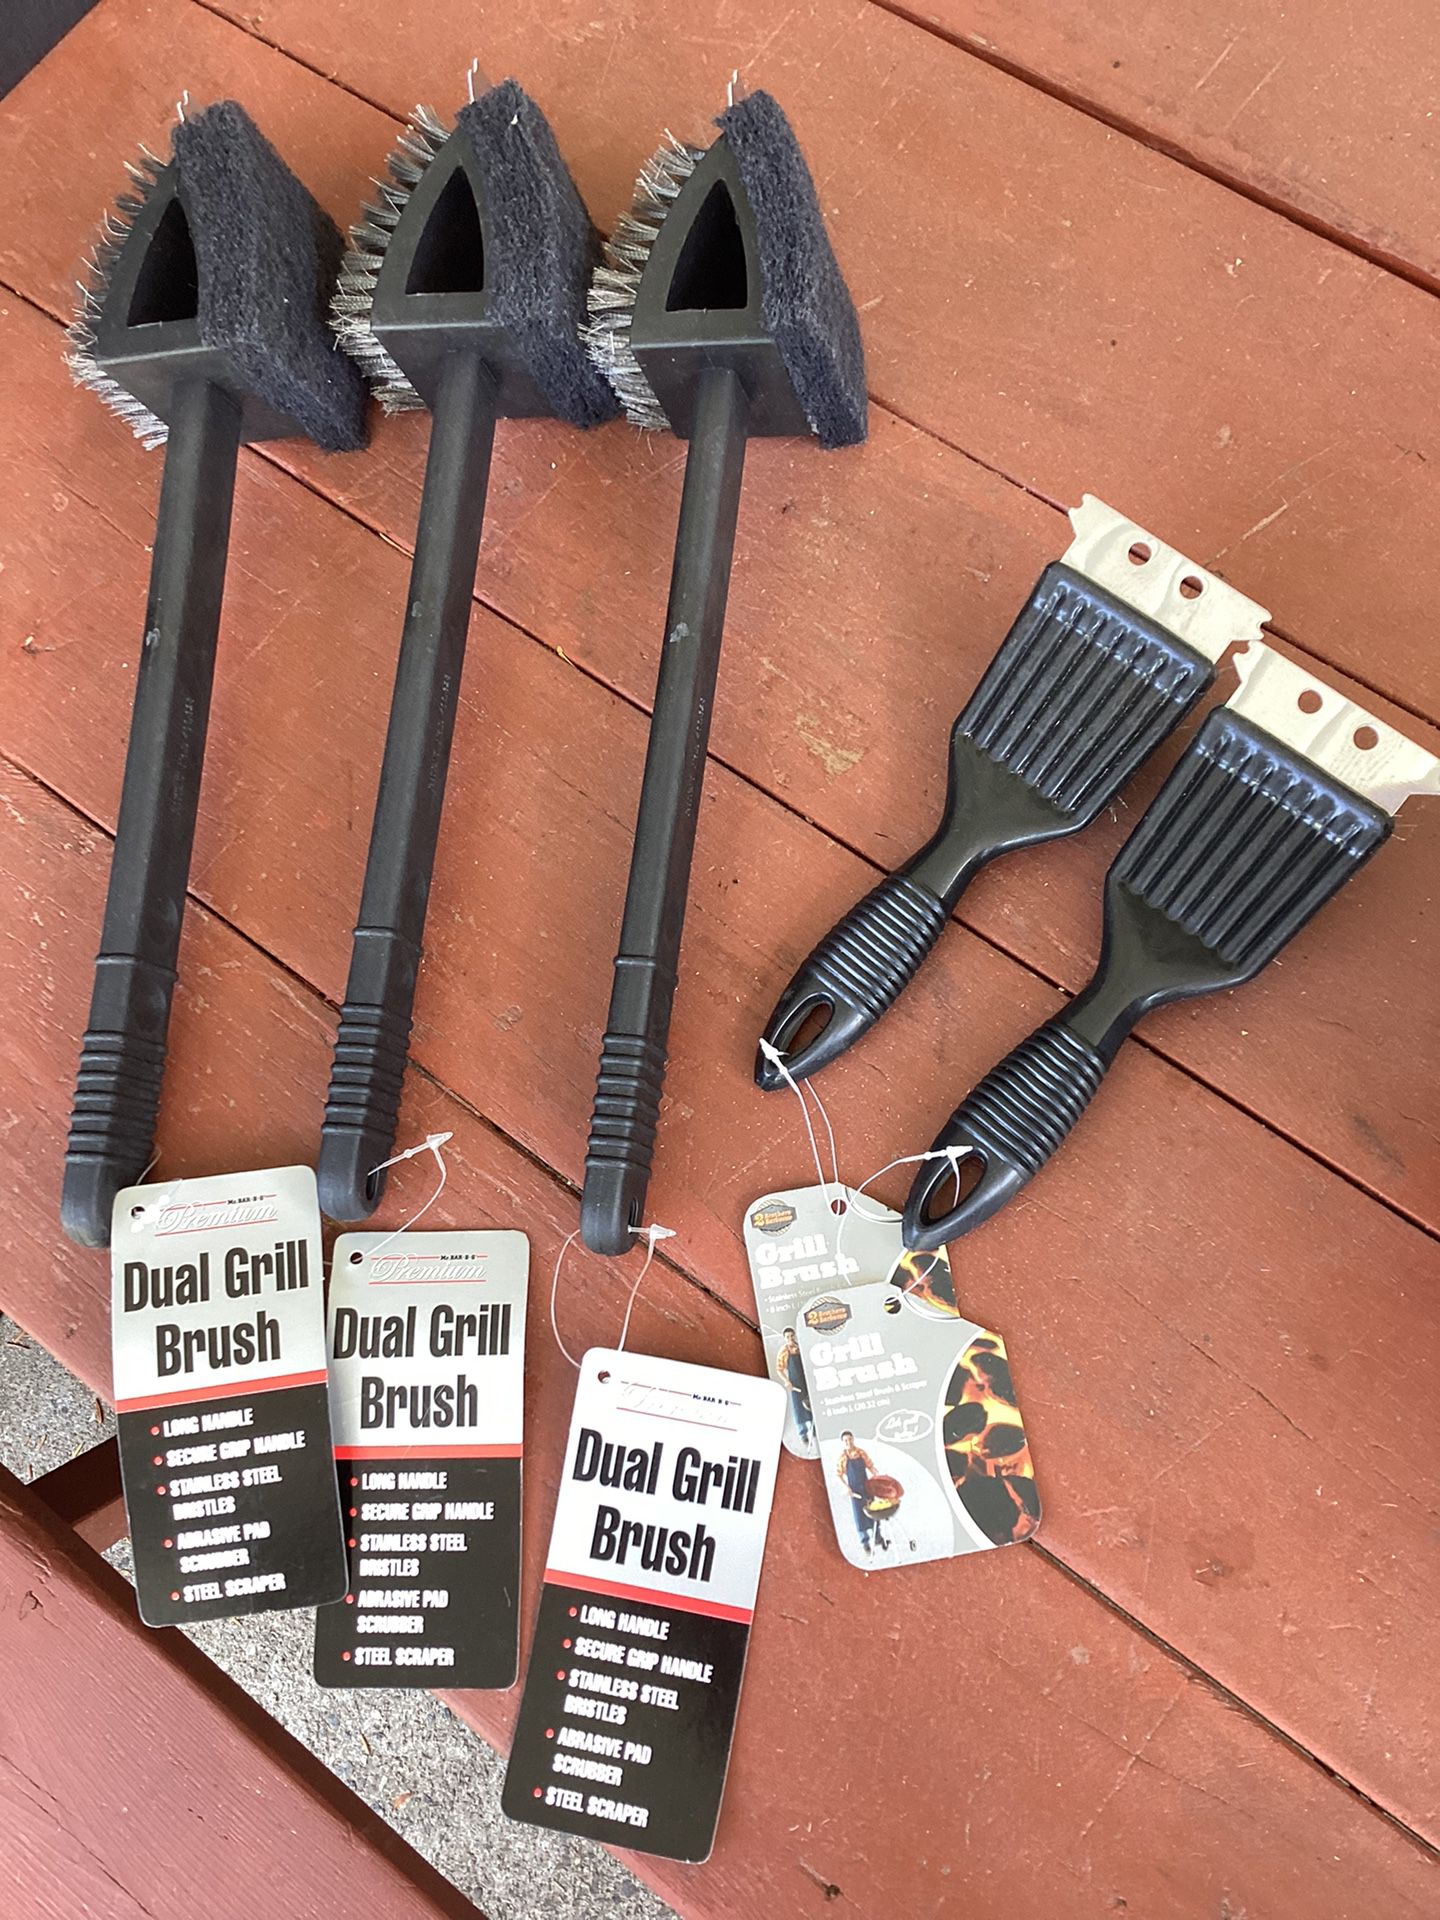 Long Handle Duo Brush/ Pad Grill Brushes $5///Small Size $2